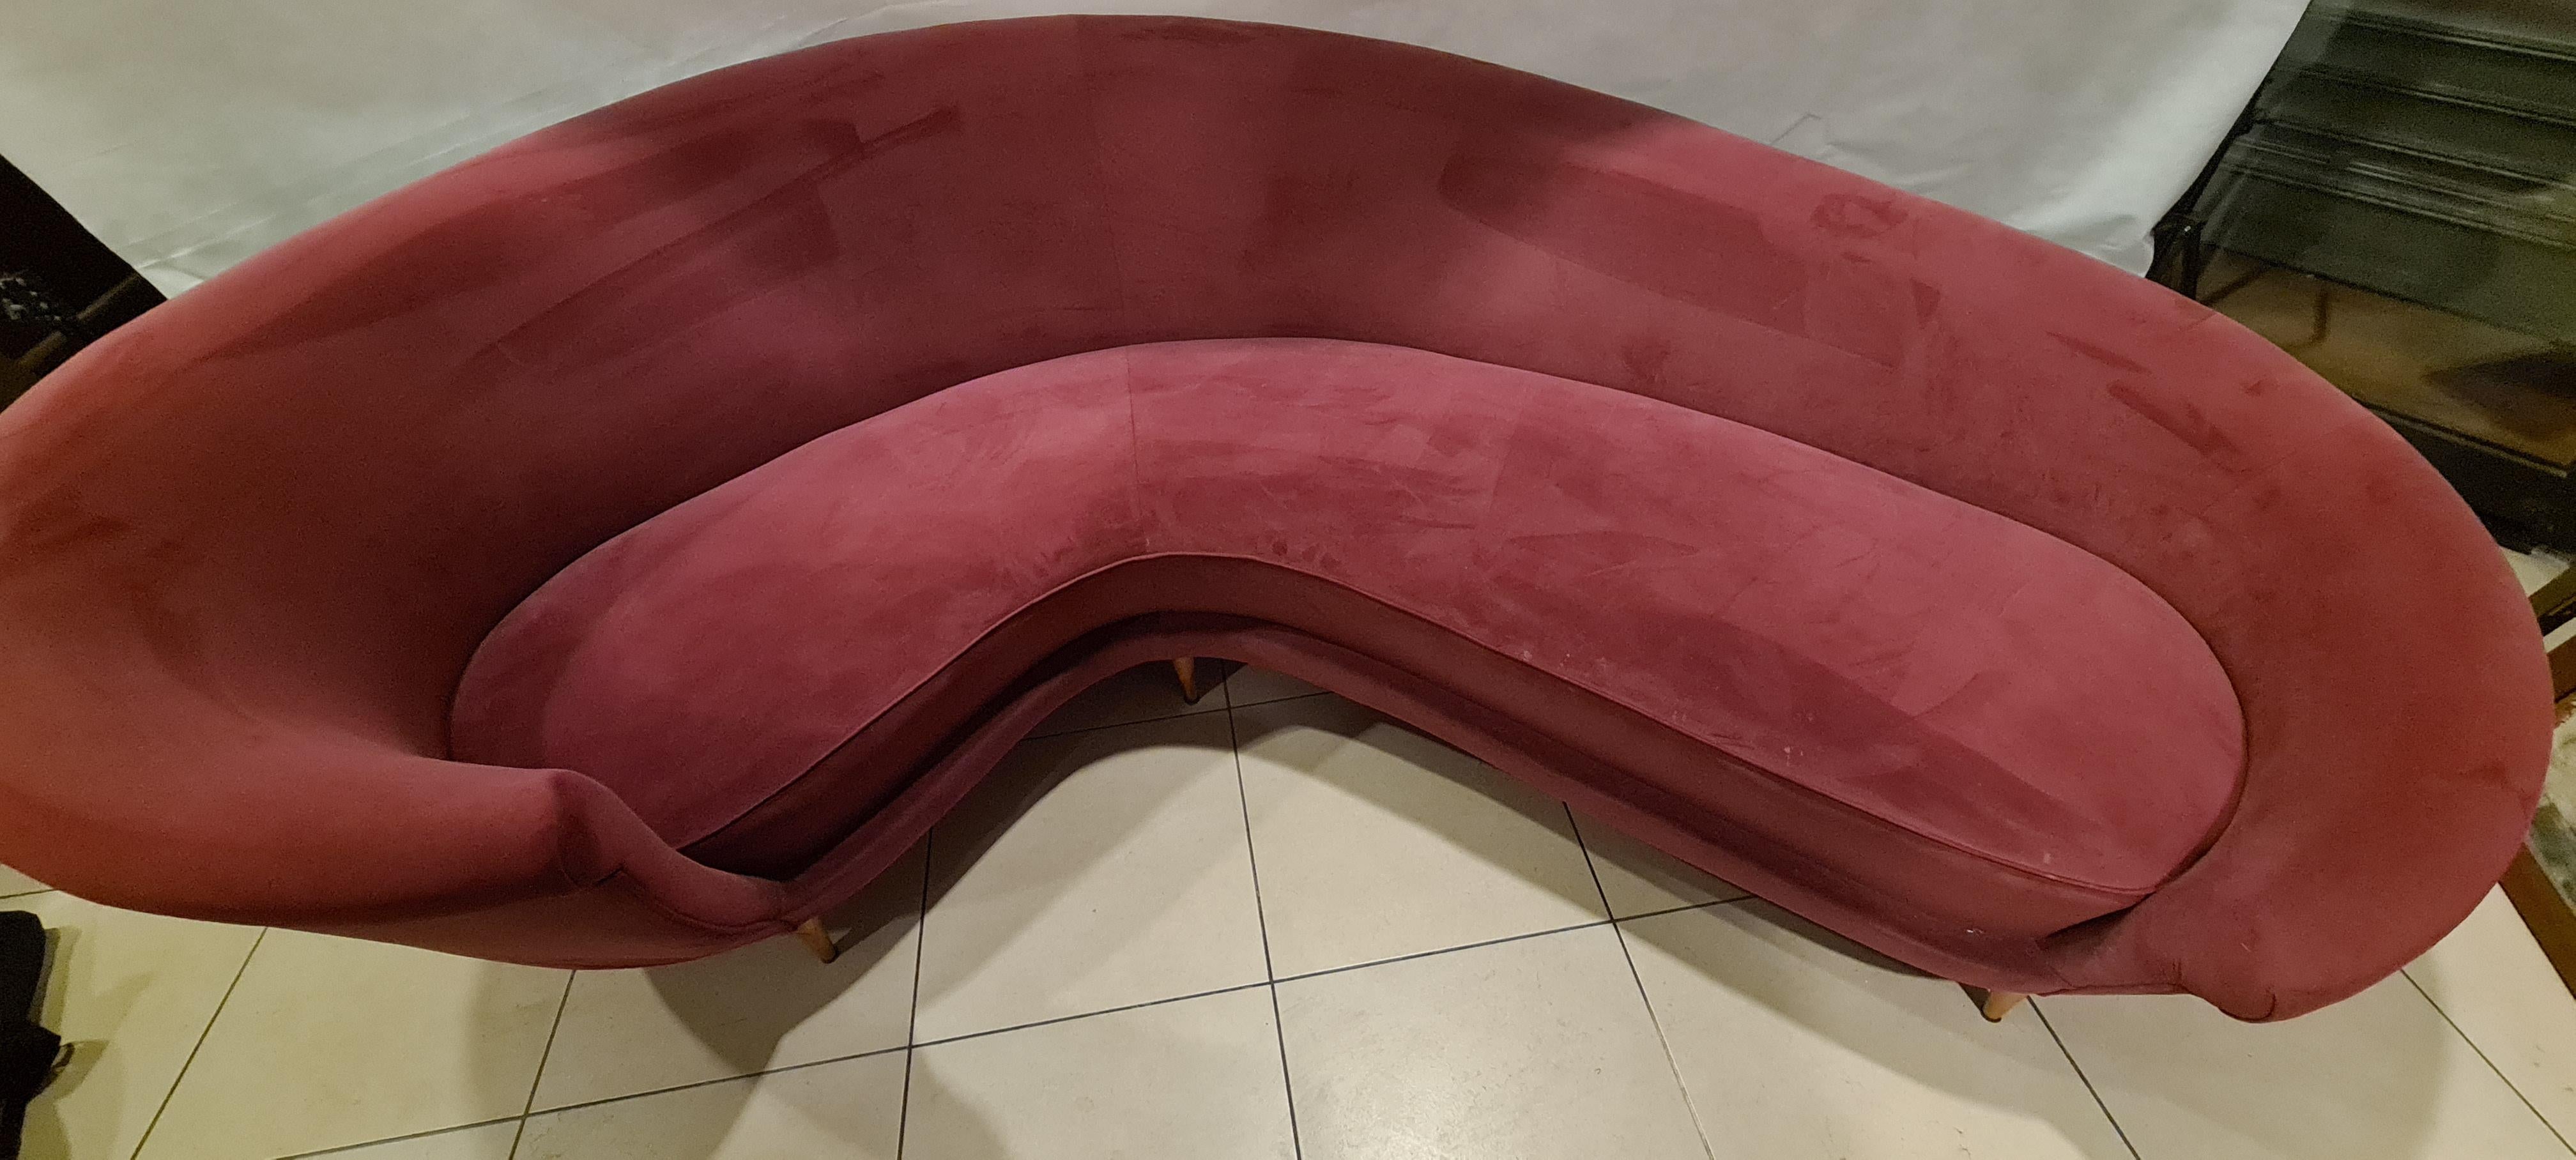 Curved sofa designed by designer Guglielmo Veronesi for Isa Bergamo.

Refined and elegant with a soft and curvy shape this sofa is ideal as a central piece of furniture to give importance to your living room.

Made with fine materials in Italy circa